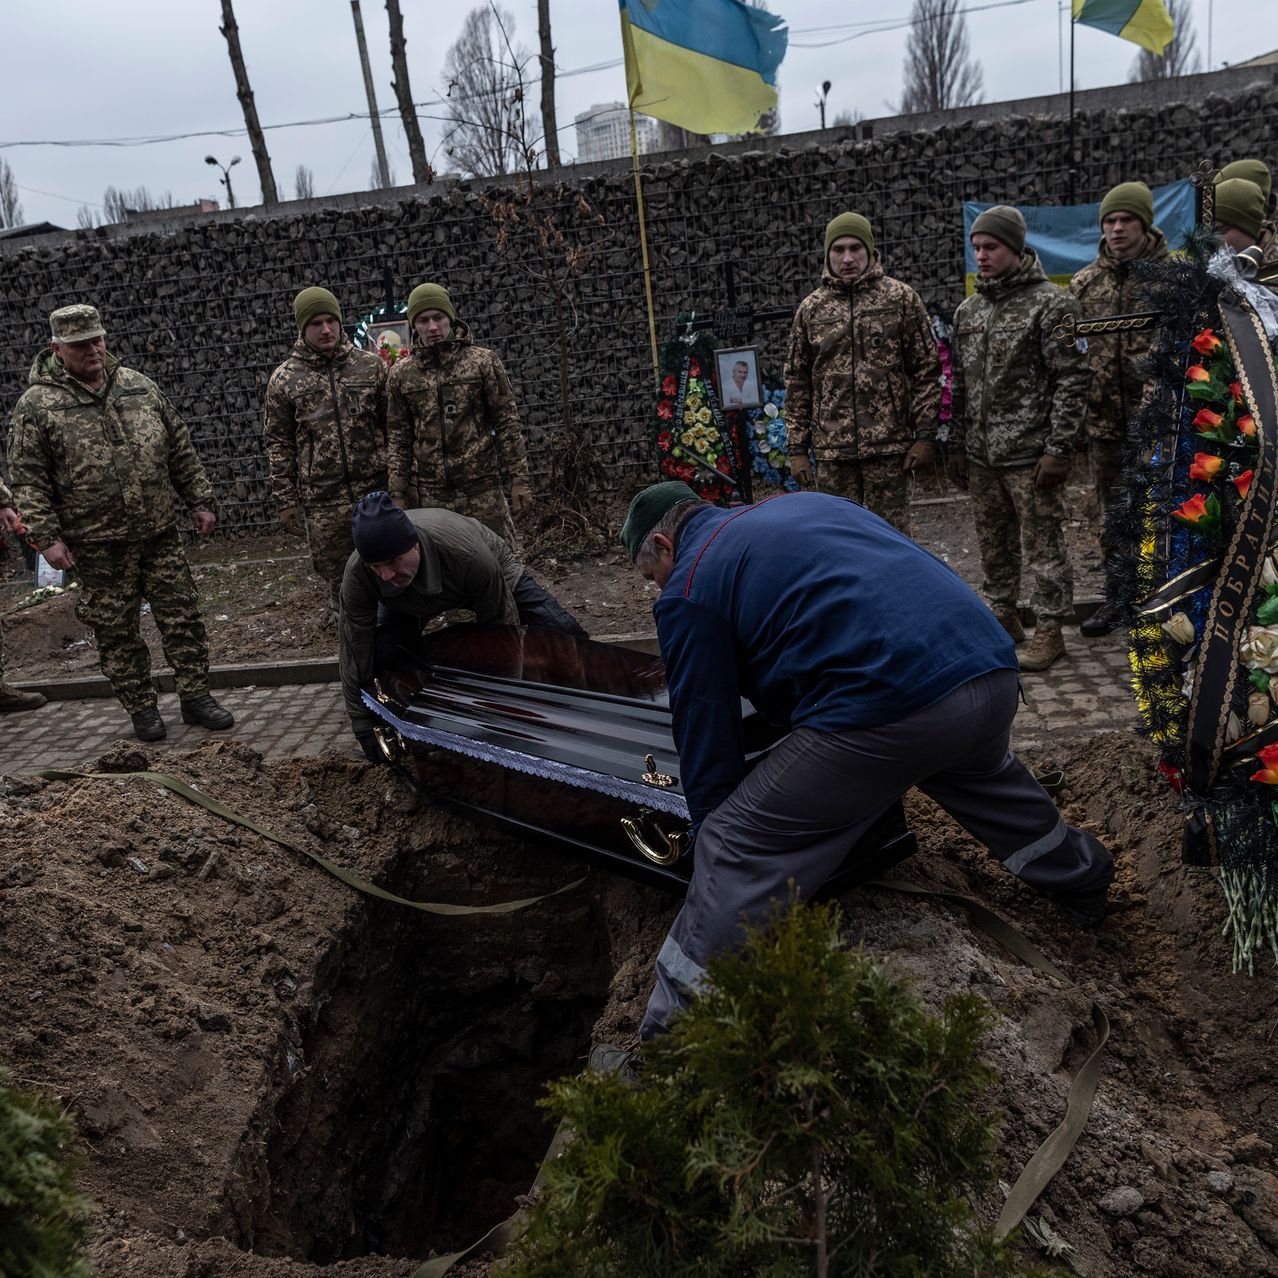 Ukraine Marks Successes Mourns Losses As War Enters Second Year Wsj